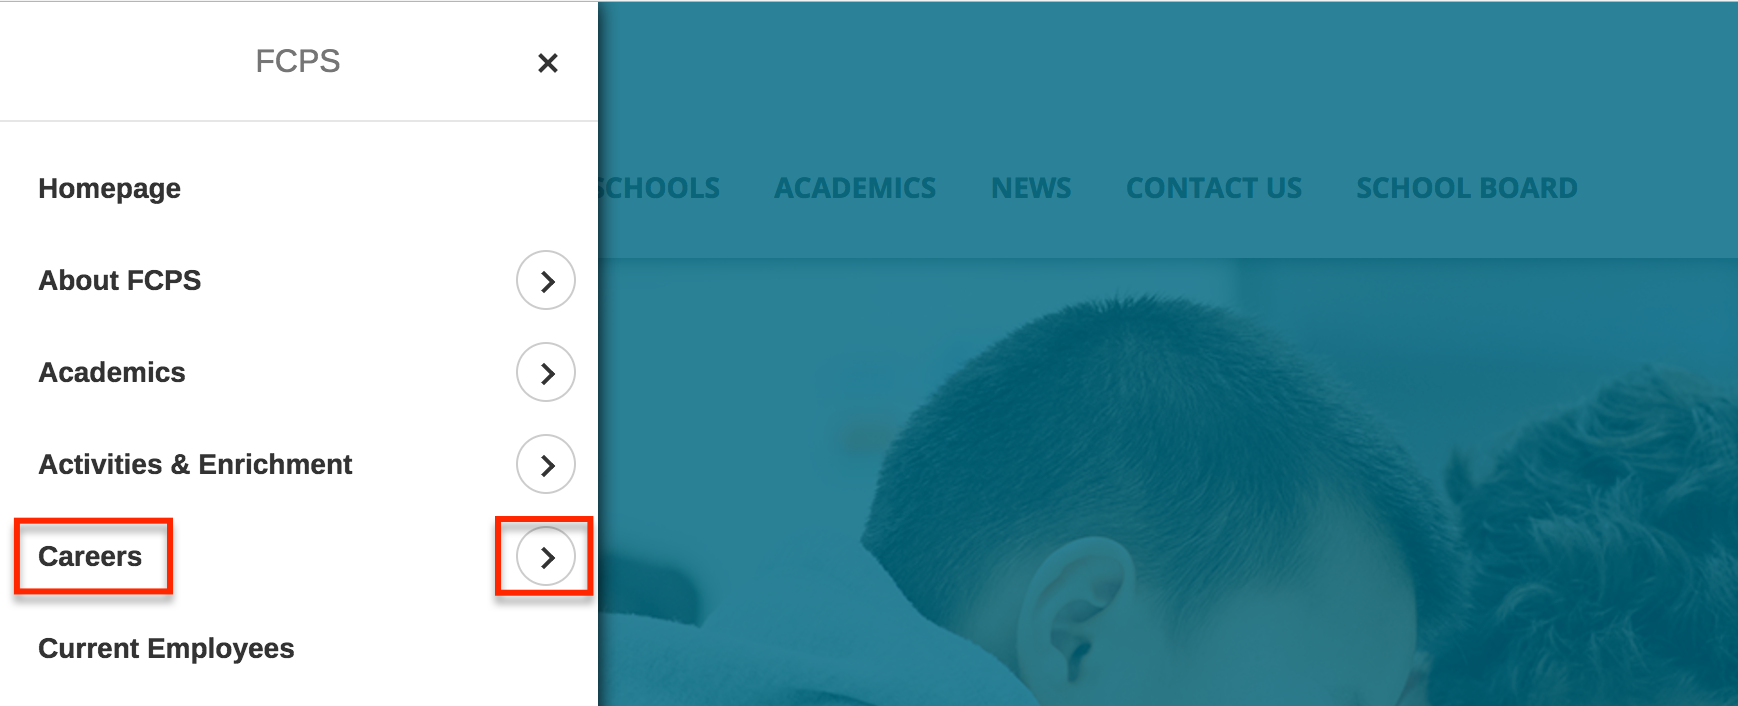 On the Fairfax County Public School’s full menu, if the user wants to access the Careers landing page they can click on the “Careers” text or they can click on the arrow to access the subpages for Careers.